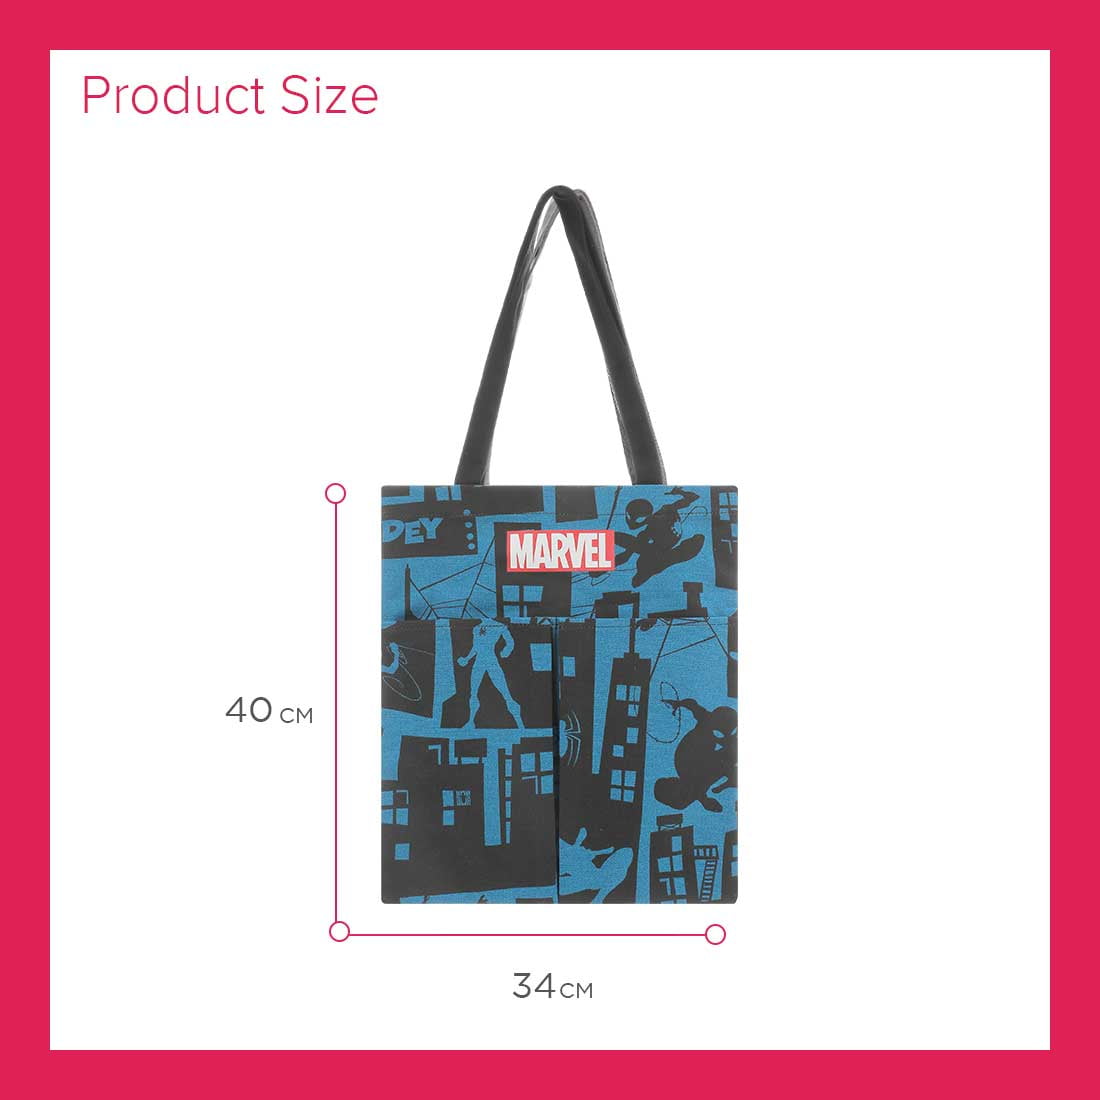 Marvel / Miniso Tote Bag with Handles and Strap Iron Man INVINCIBLE Nwt